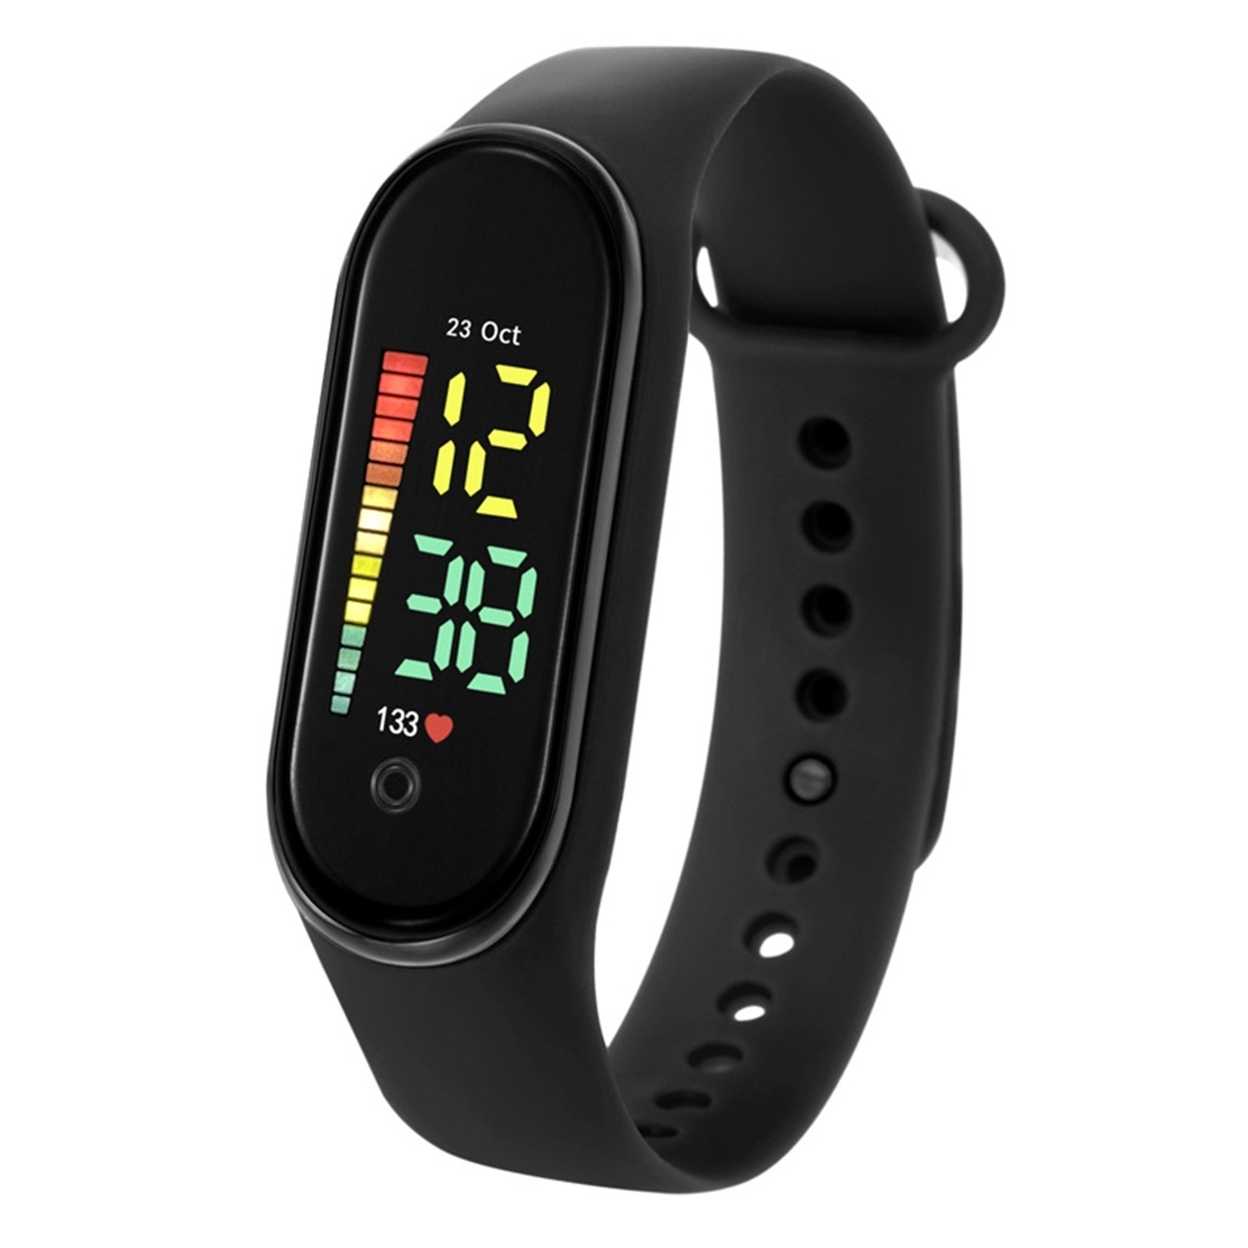 Generic Digital Watch M11 Children Watch Waterproof Colorful LED Students Kids Sports Watch Soft Strap Clear Display Watch